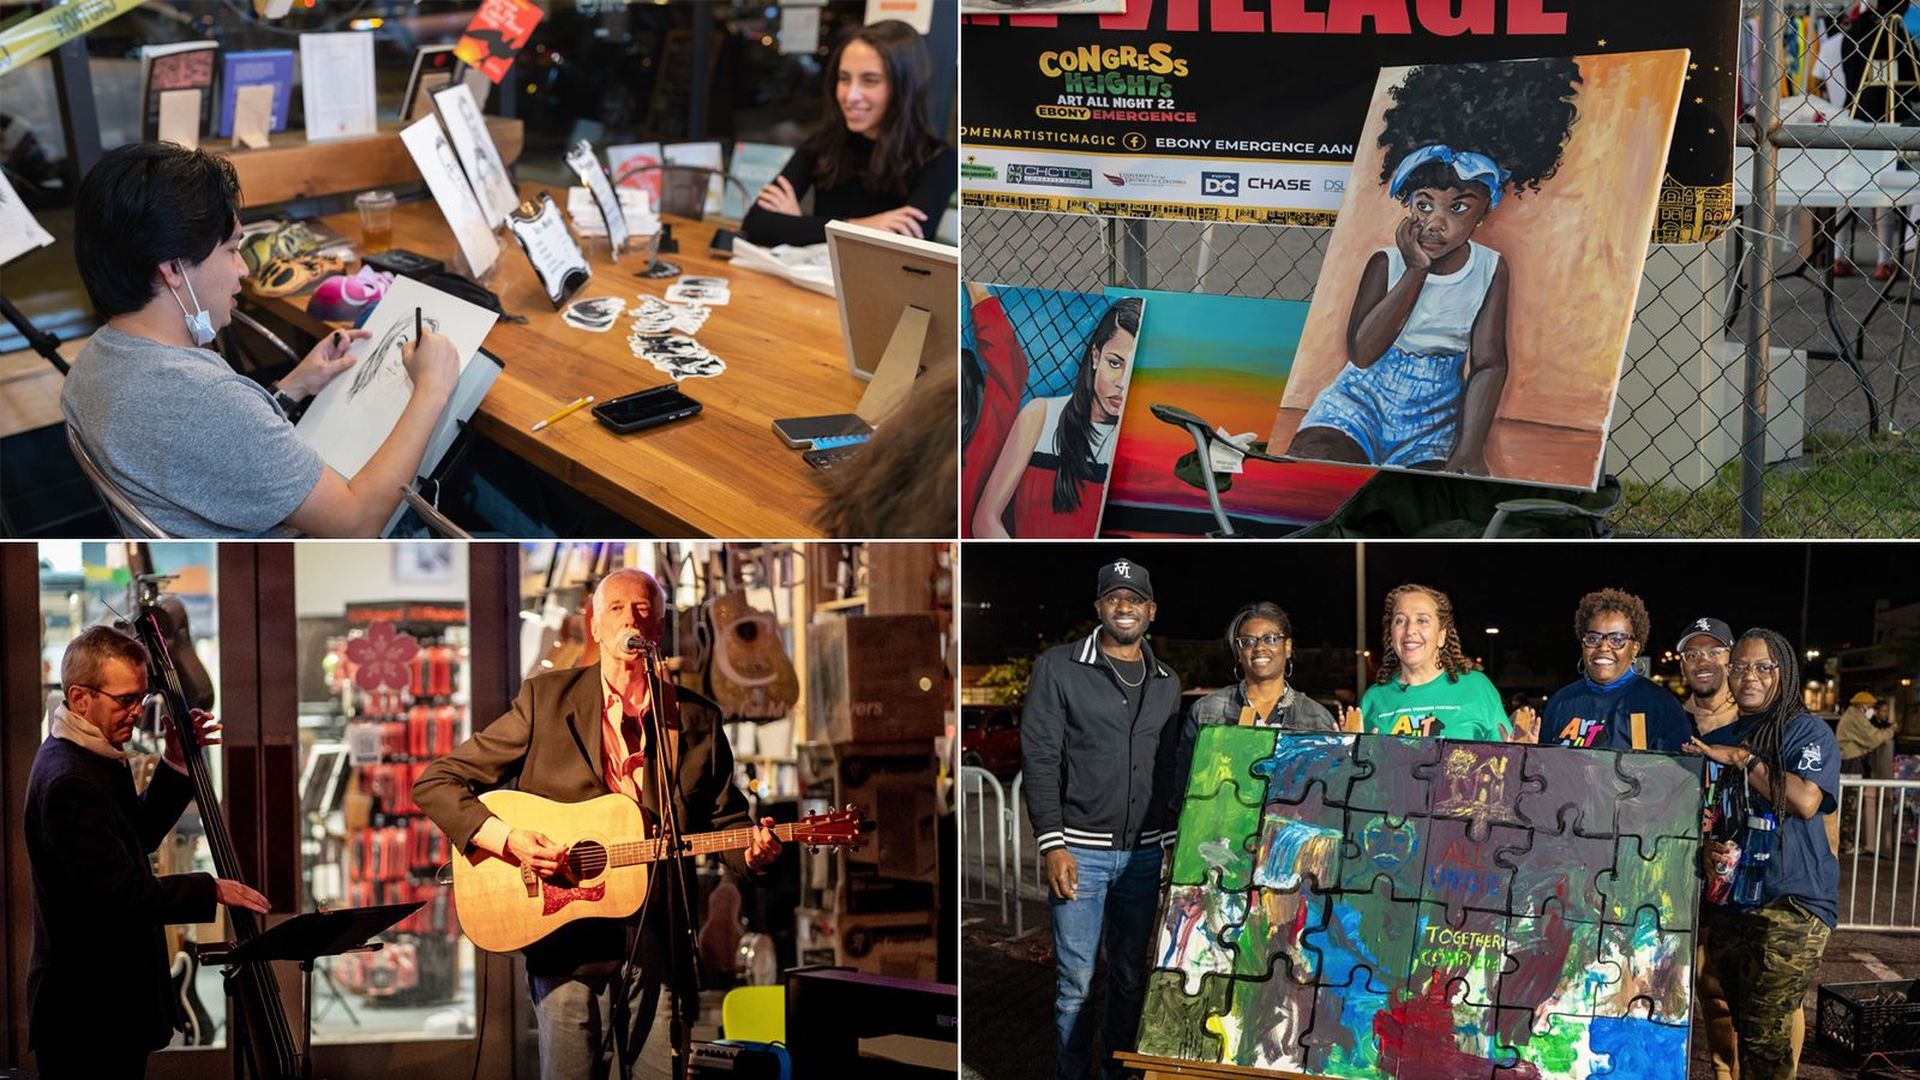 An image showing four photos from an art event: The top left image shows someone drawing, the top right image shows a painting of a girl, the bottom left shows a man playing guitar and the bottom right shows a group holding up a piece of artwork that looks like puzzle pieces. 